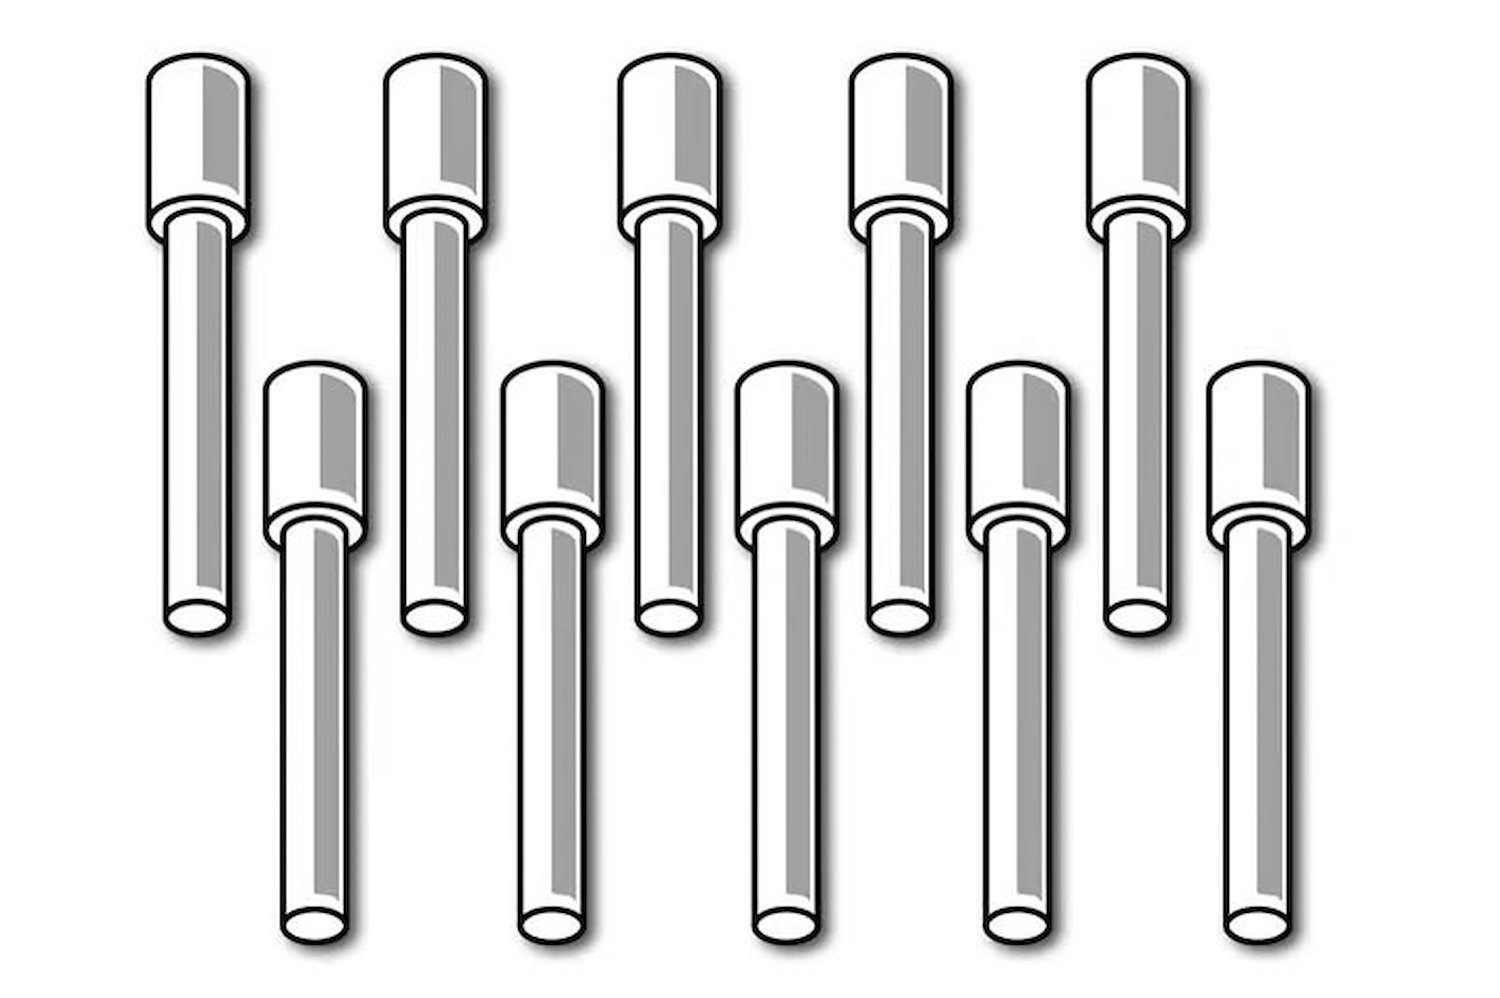 HT-030052 Plastic AMP Connector-Pins Only, Waterproofing/Blanking